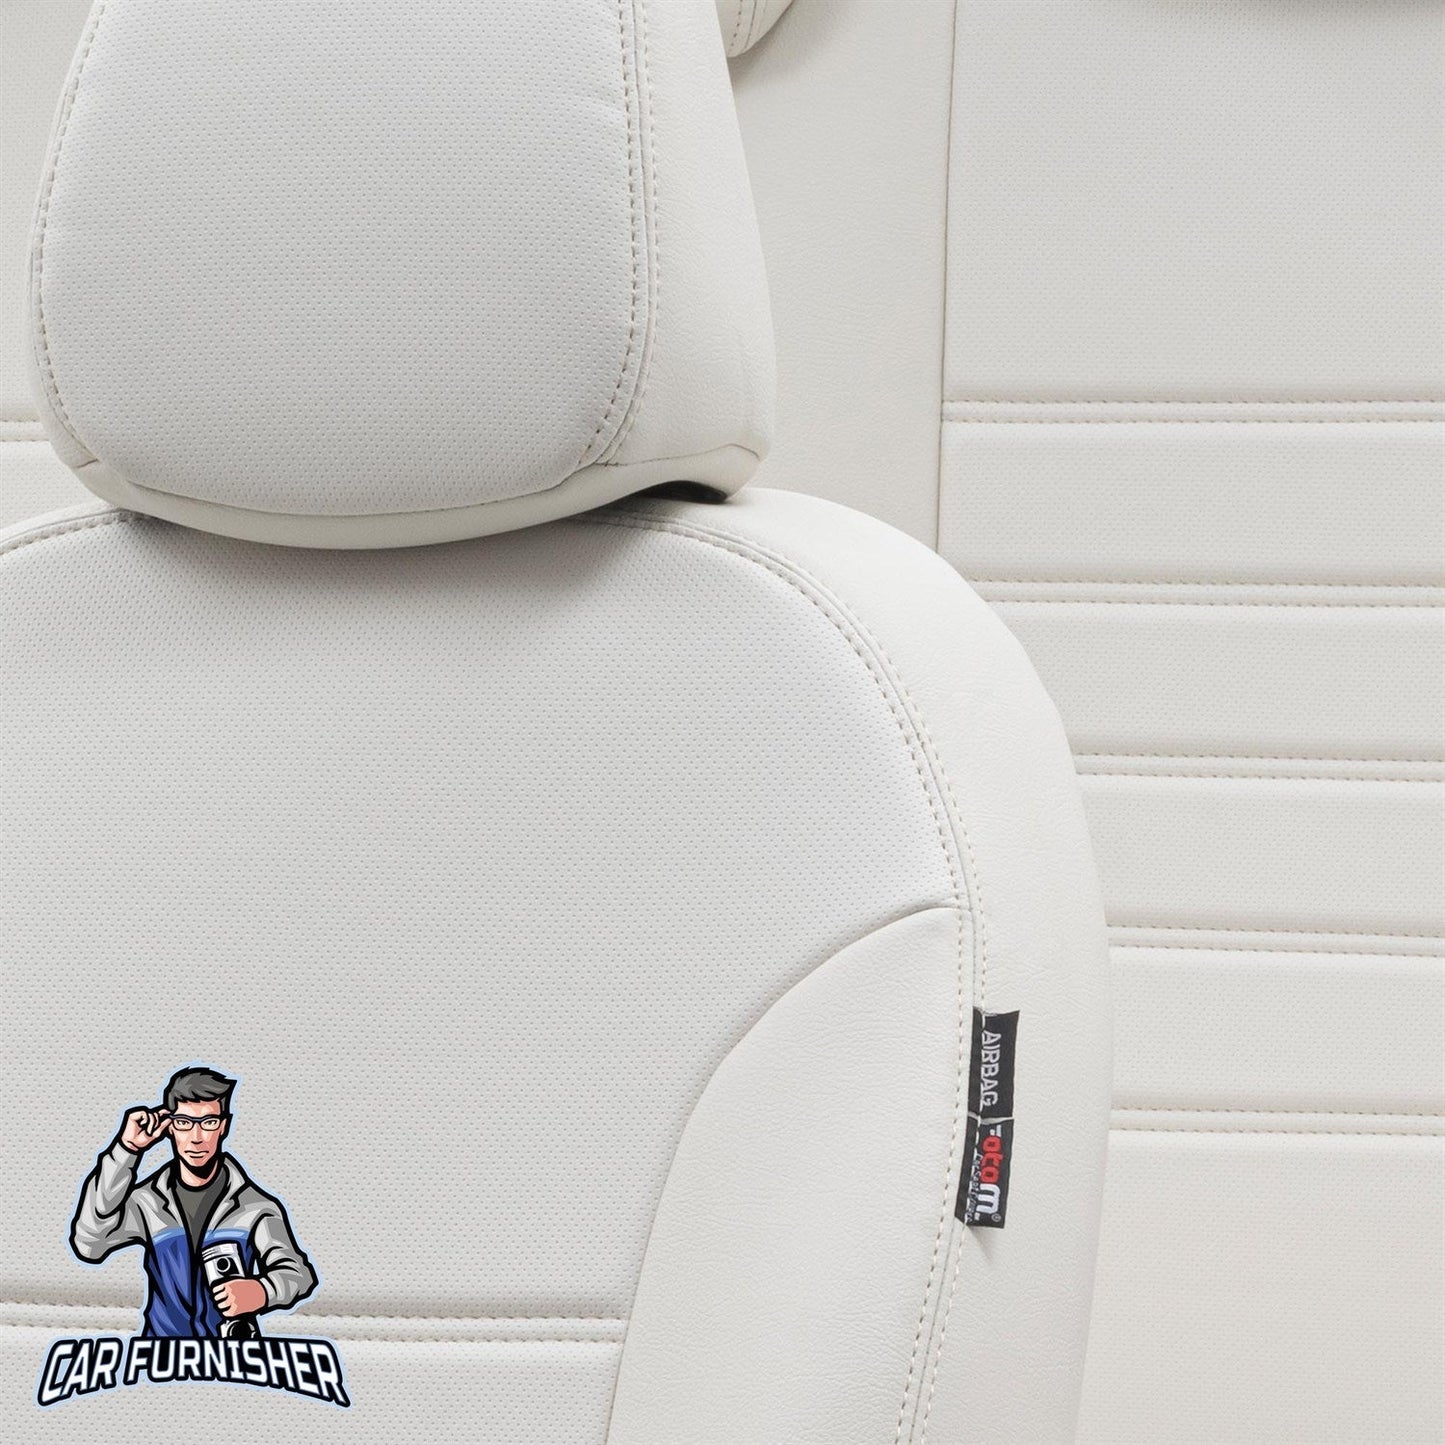 Porsche Cayenne Seat Covers Istanbul Leather Design Ivory Leather